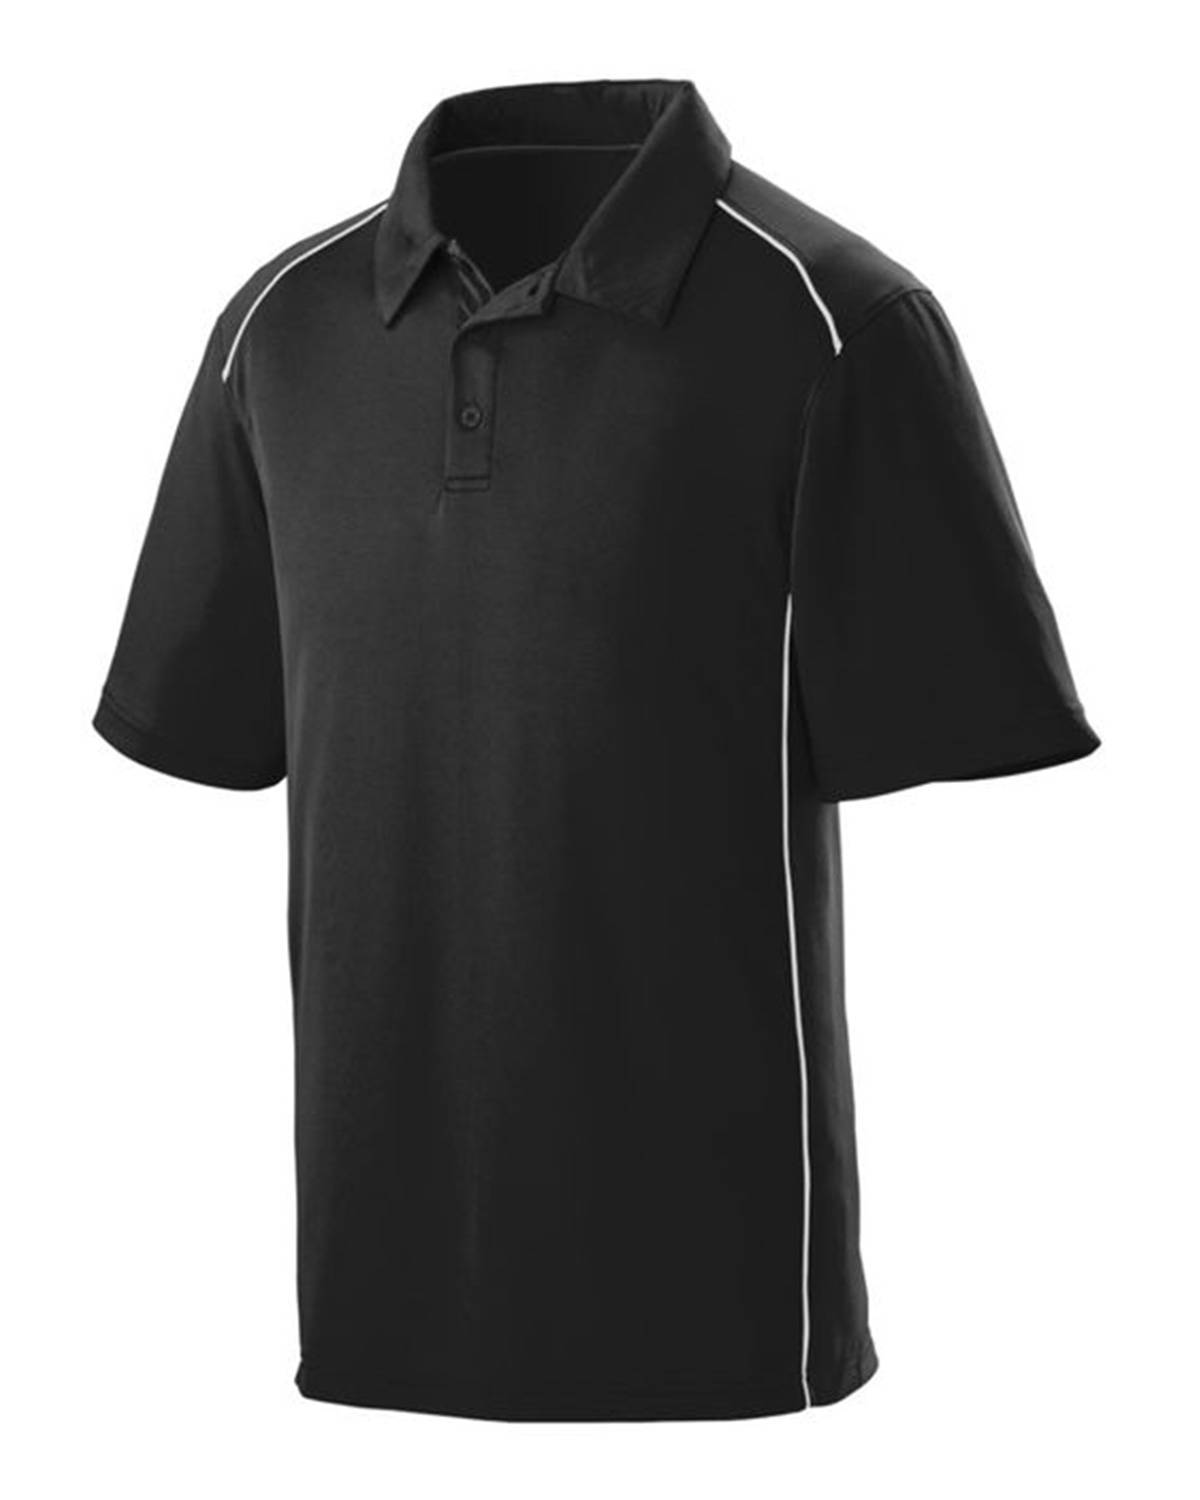 Augusta Sportswear 5091 Men's Wicking Polyester Sport Shirt with Contrast Piping